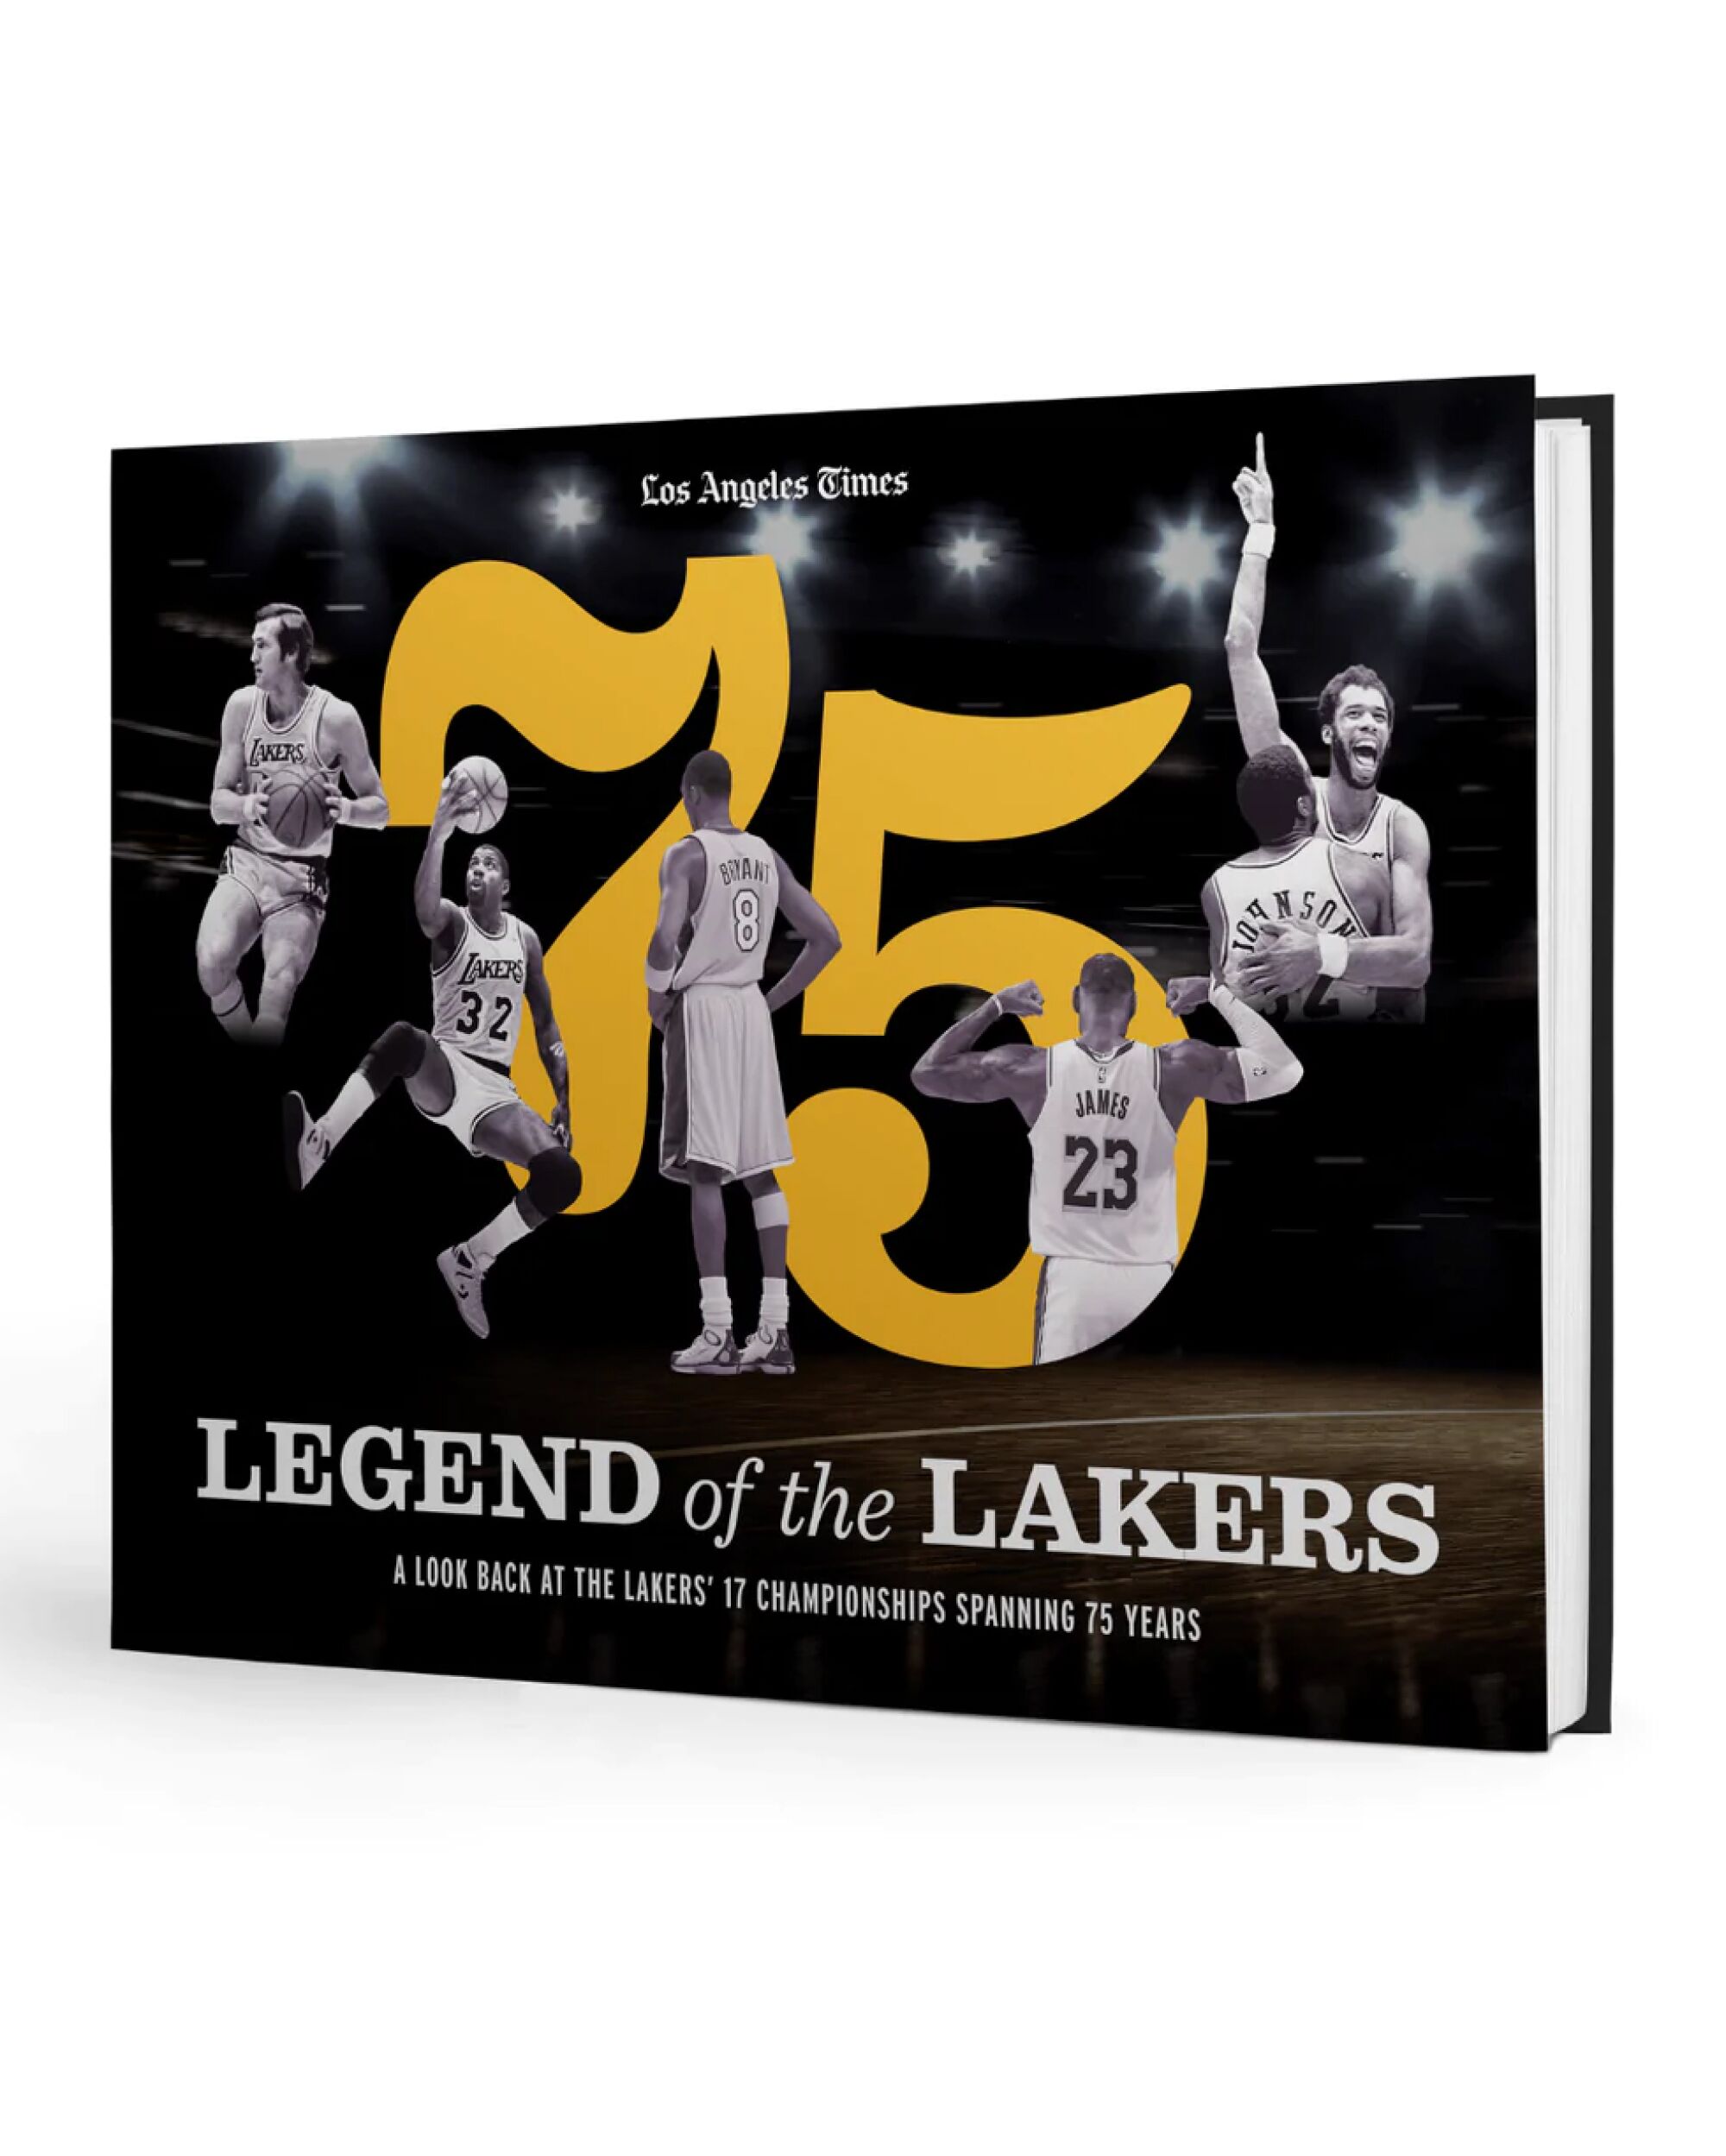 "Legend of the Lakers: A Look Back at the Lakers’ 17 Championships Spanning 75 Years" book